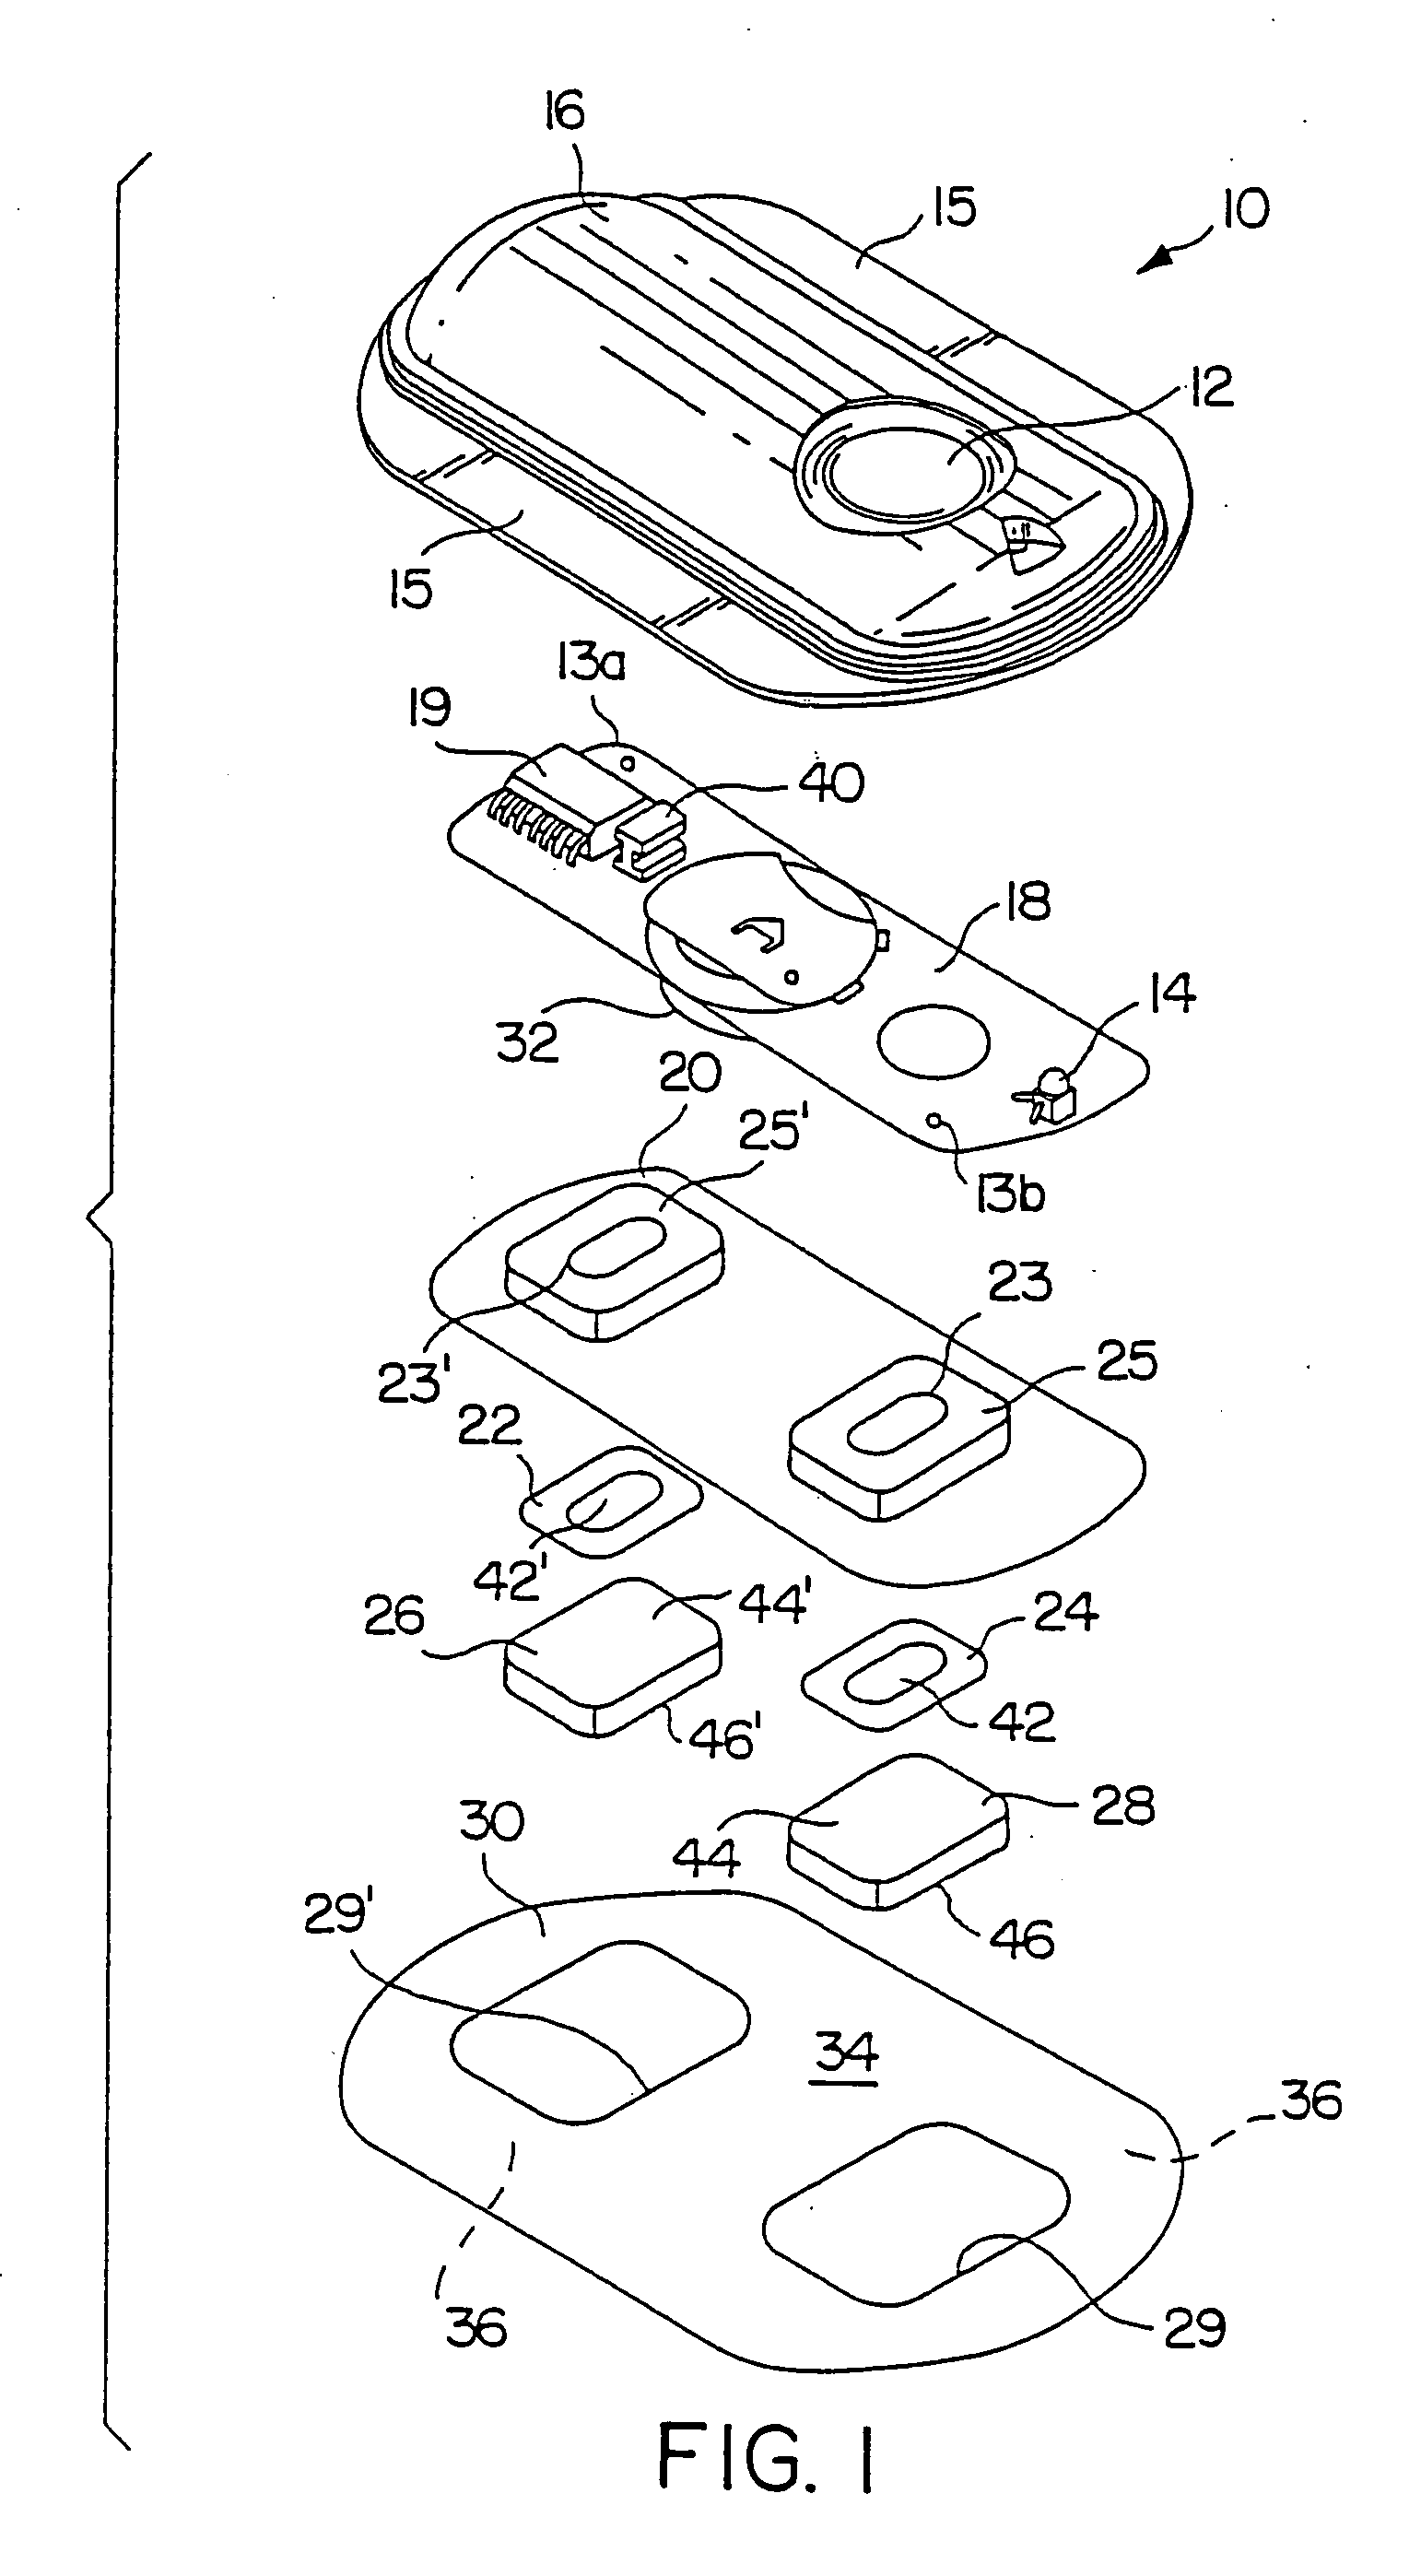 Reservoir housing having a conductive region integrally formed therein